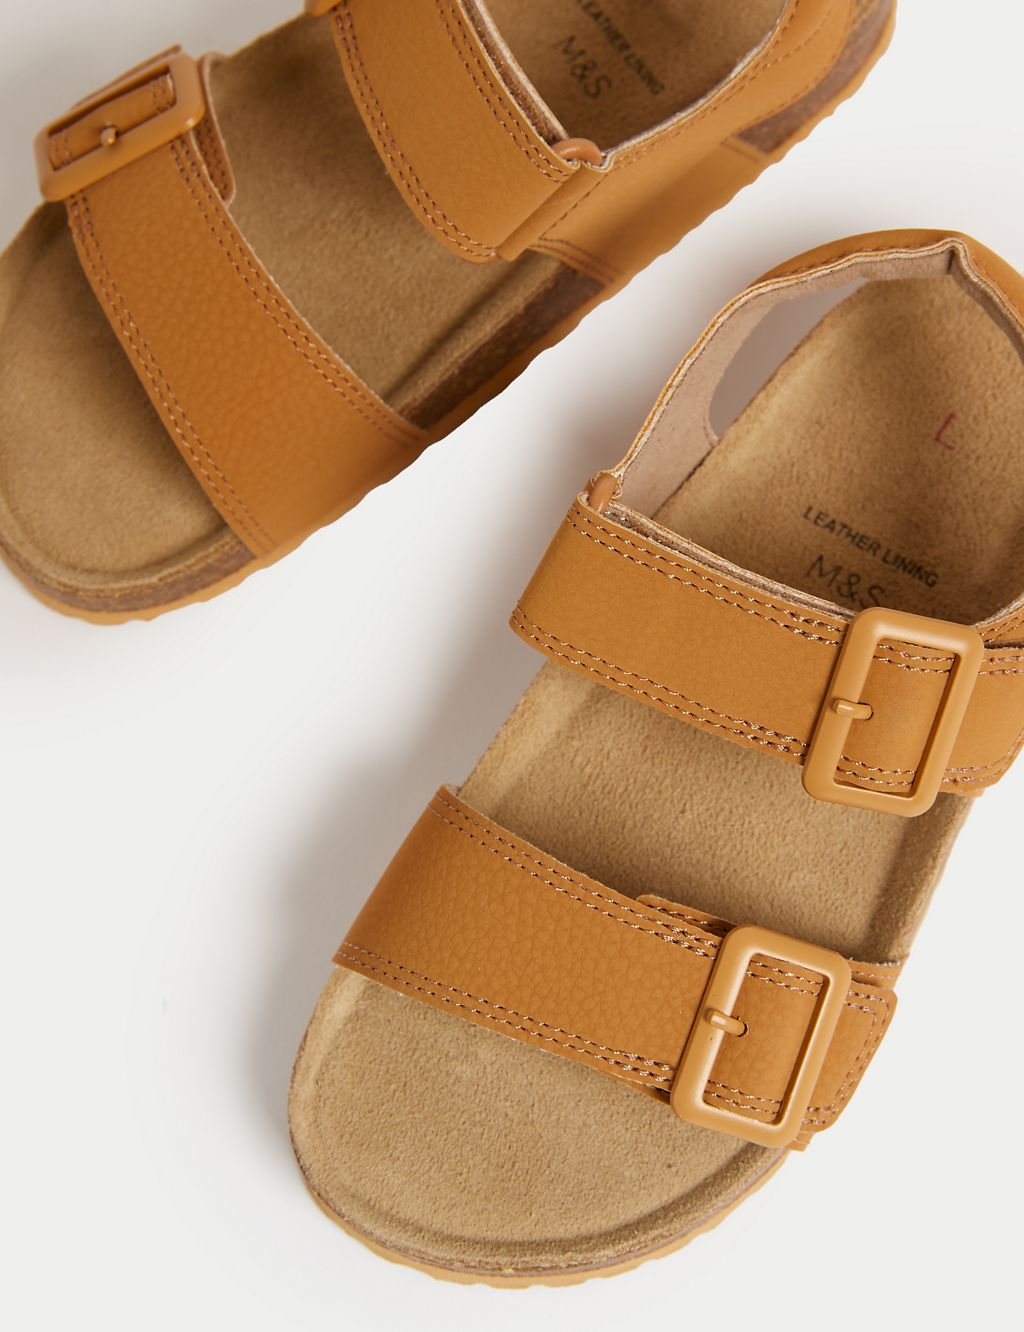 Kids' Footbed Sandals (4 Small - 2 Large) 2 of 4